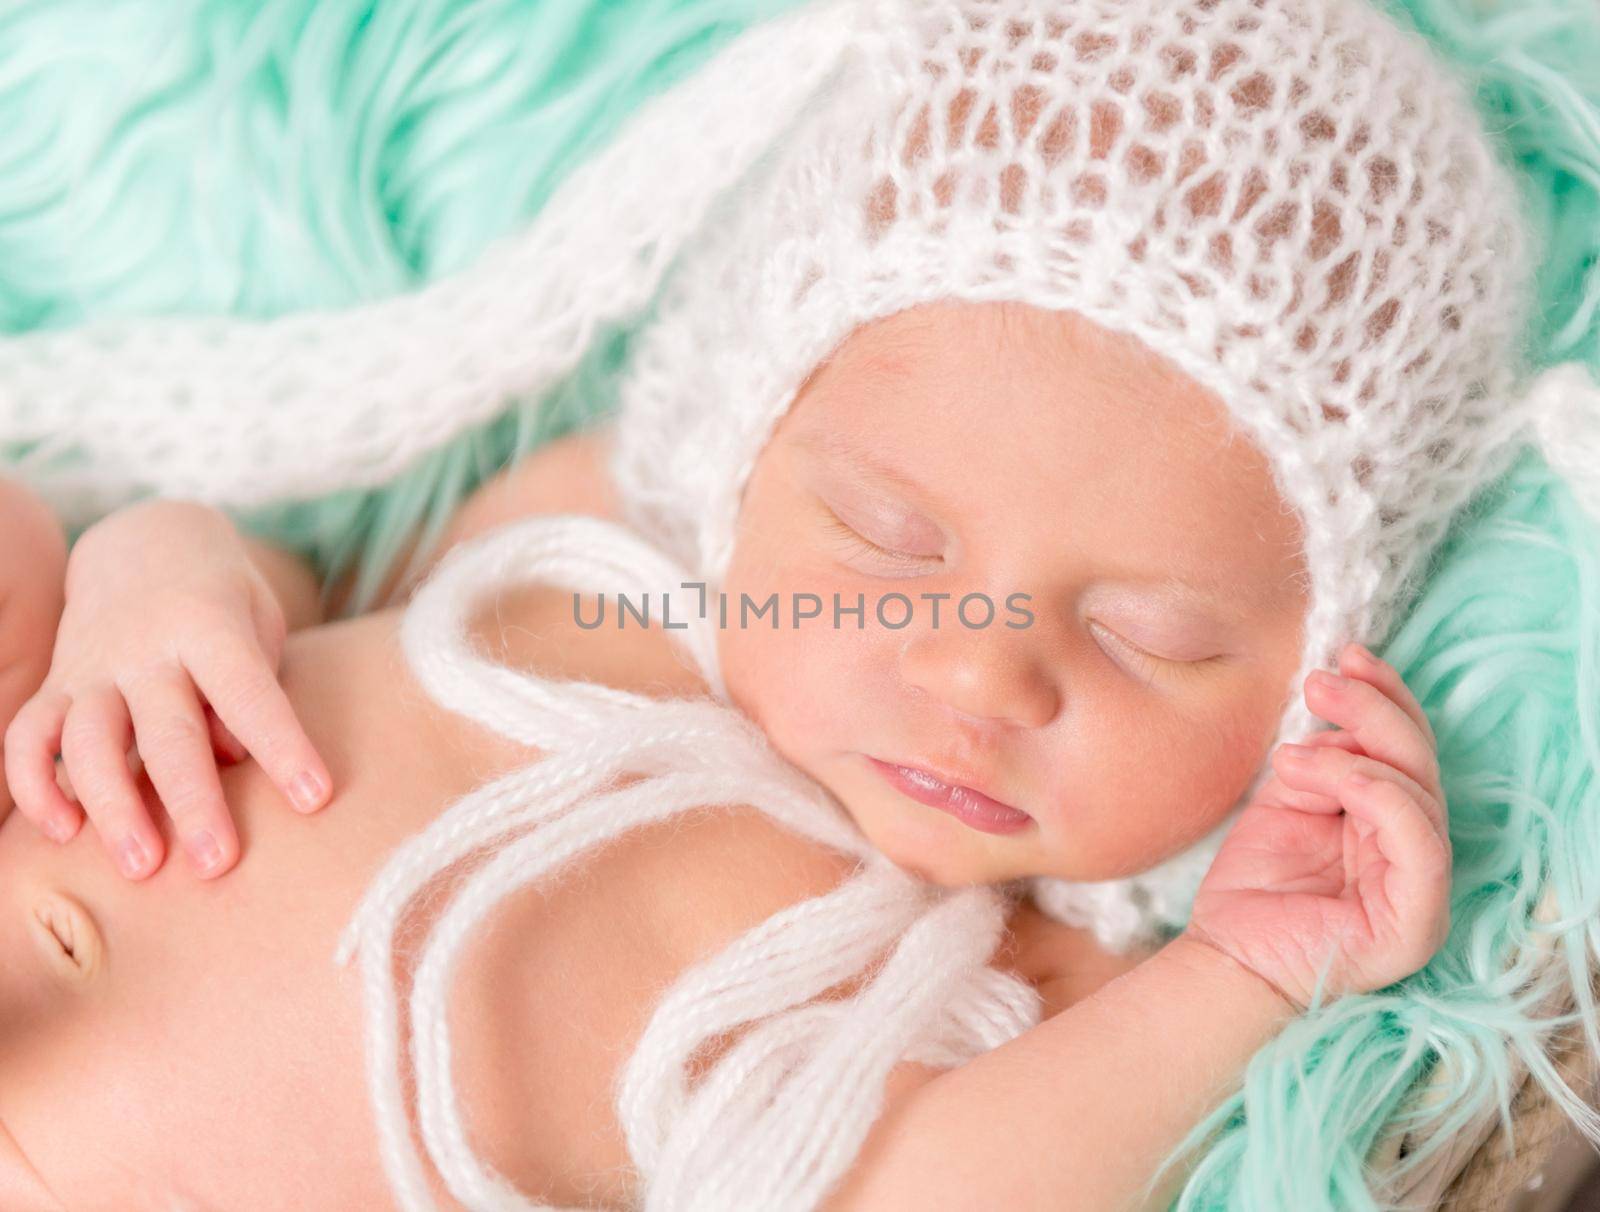 lovely newborn baby in hat sleeping on turquoise fluffy blanket, closeup